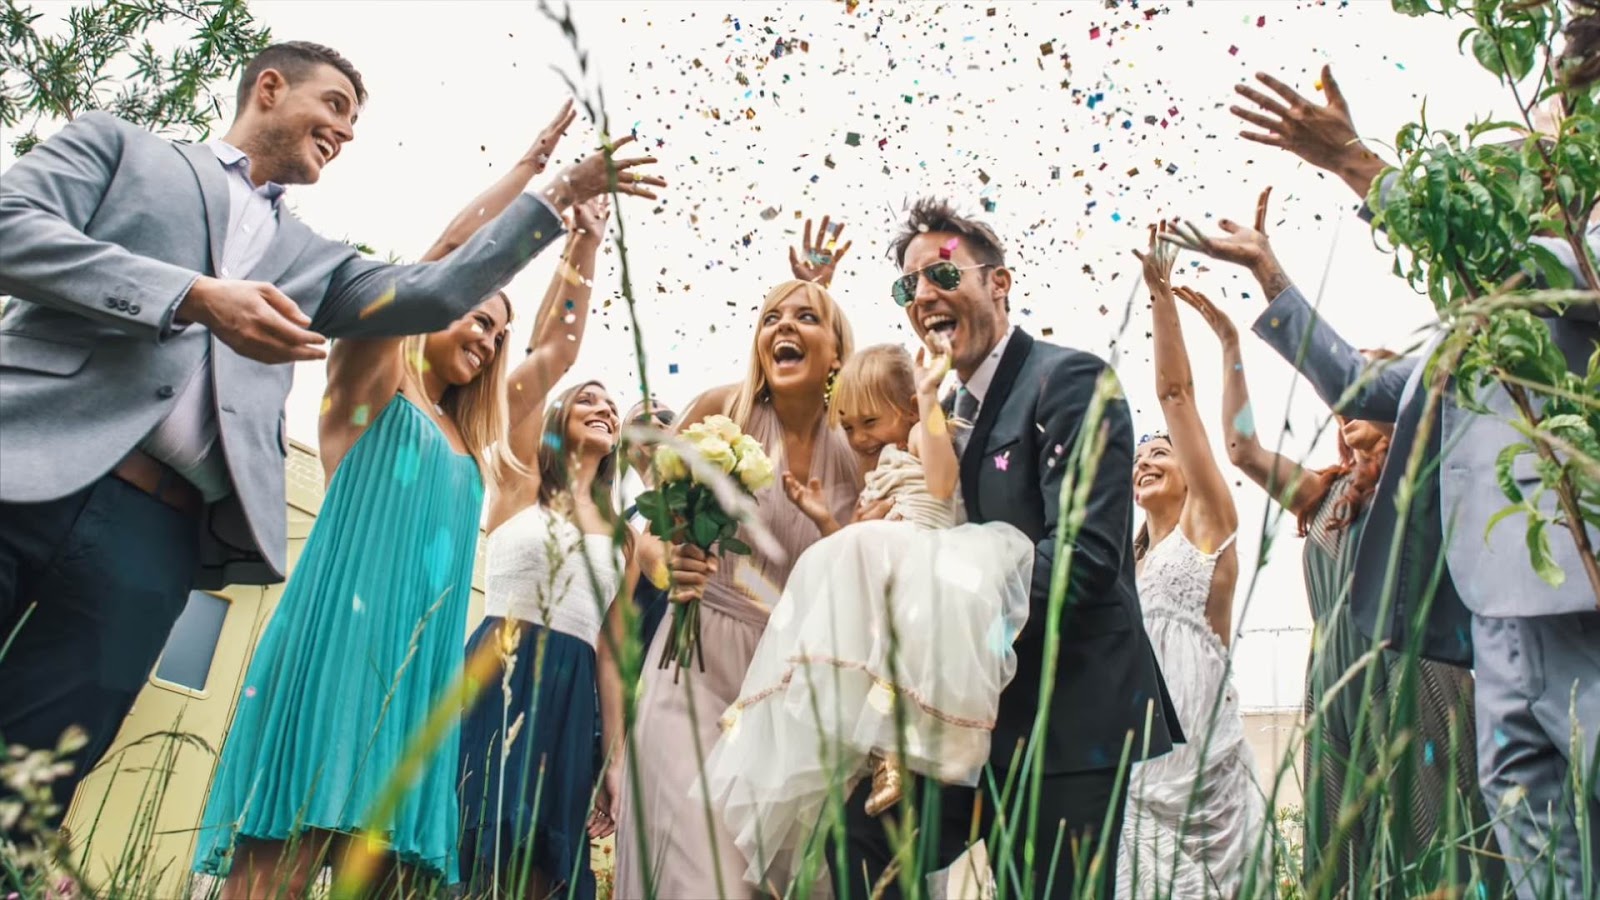 Take the best WEDDING photograph EVERY time